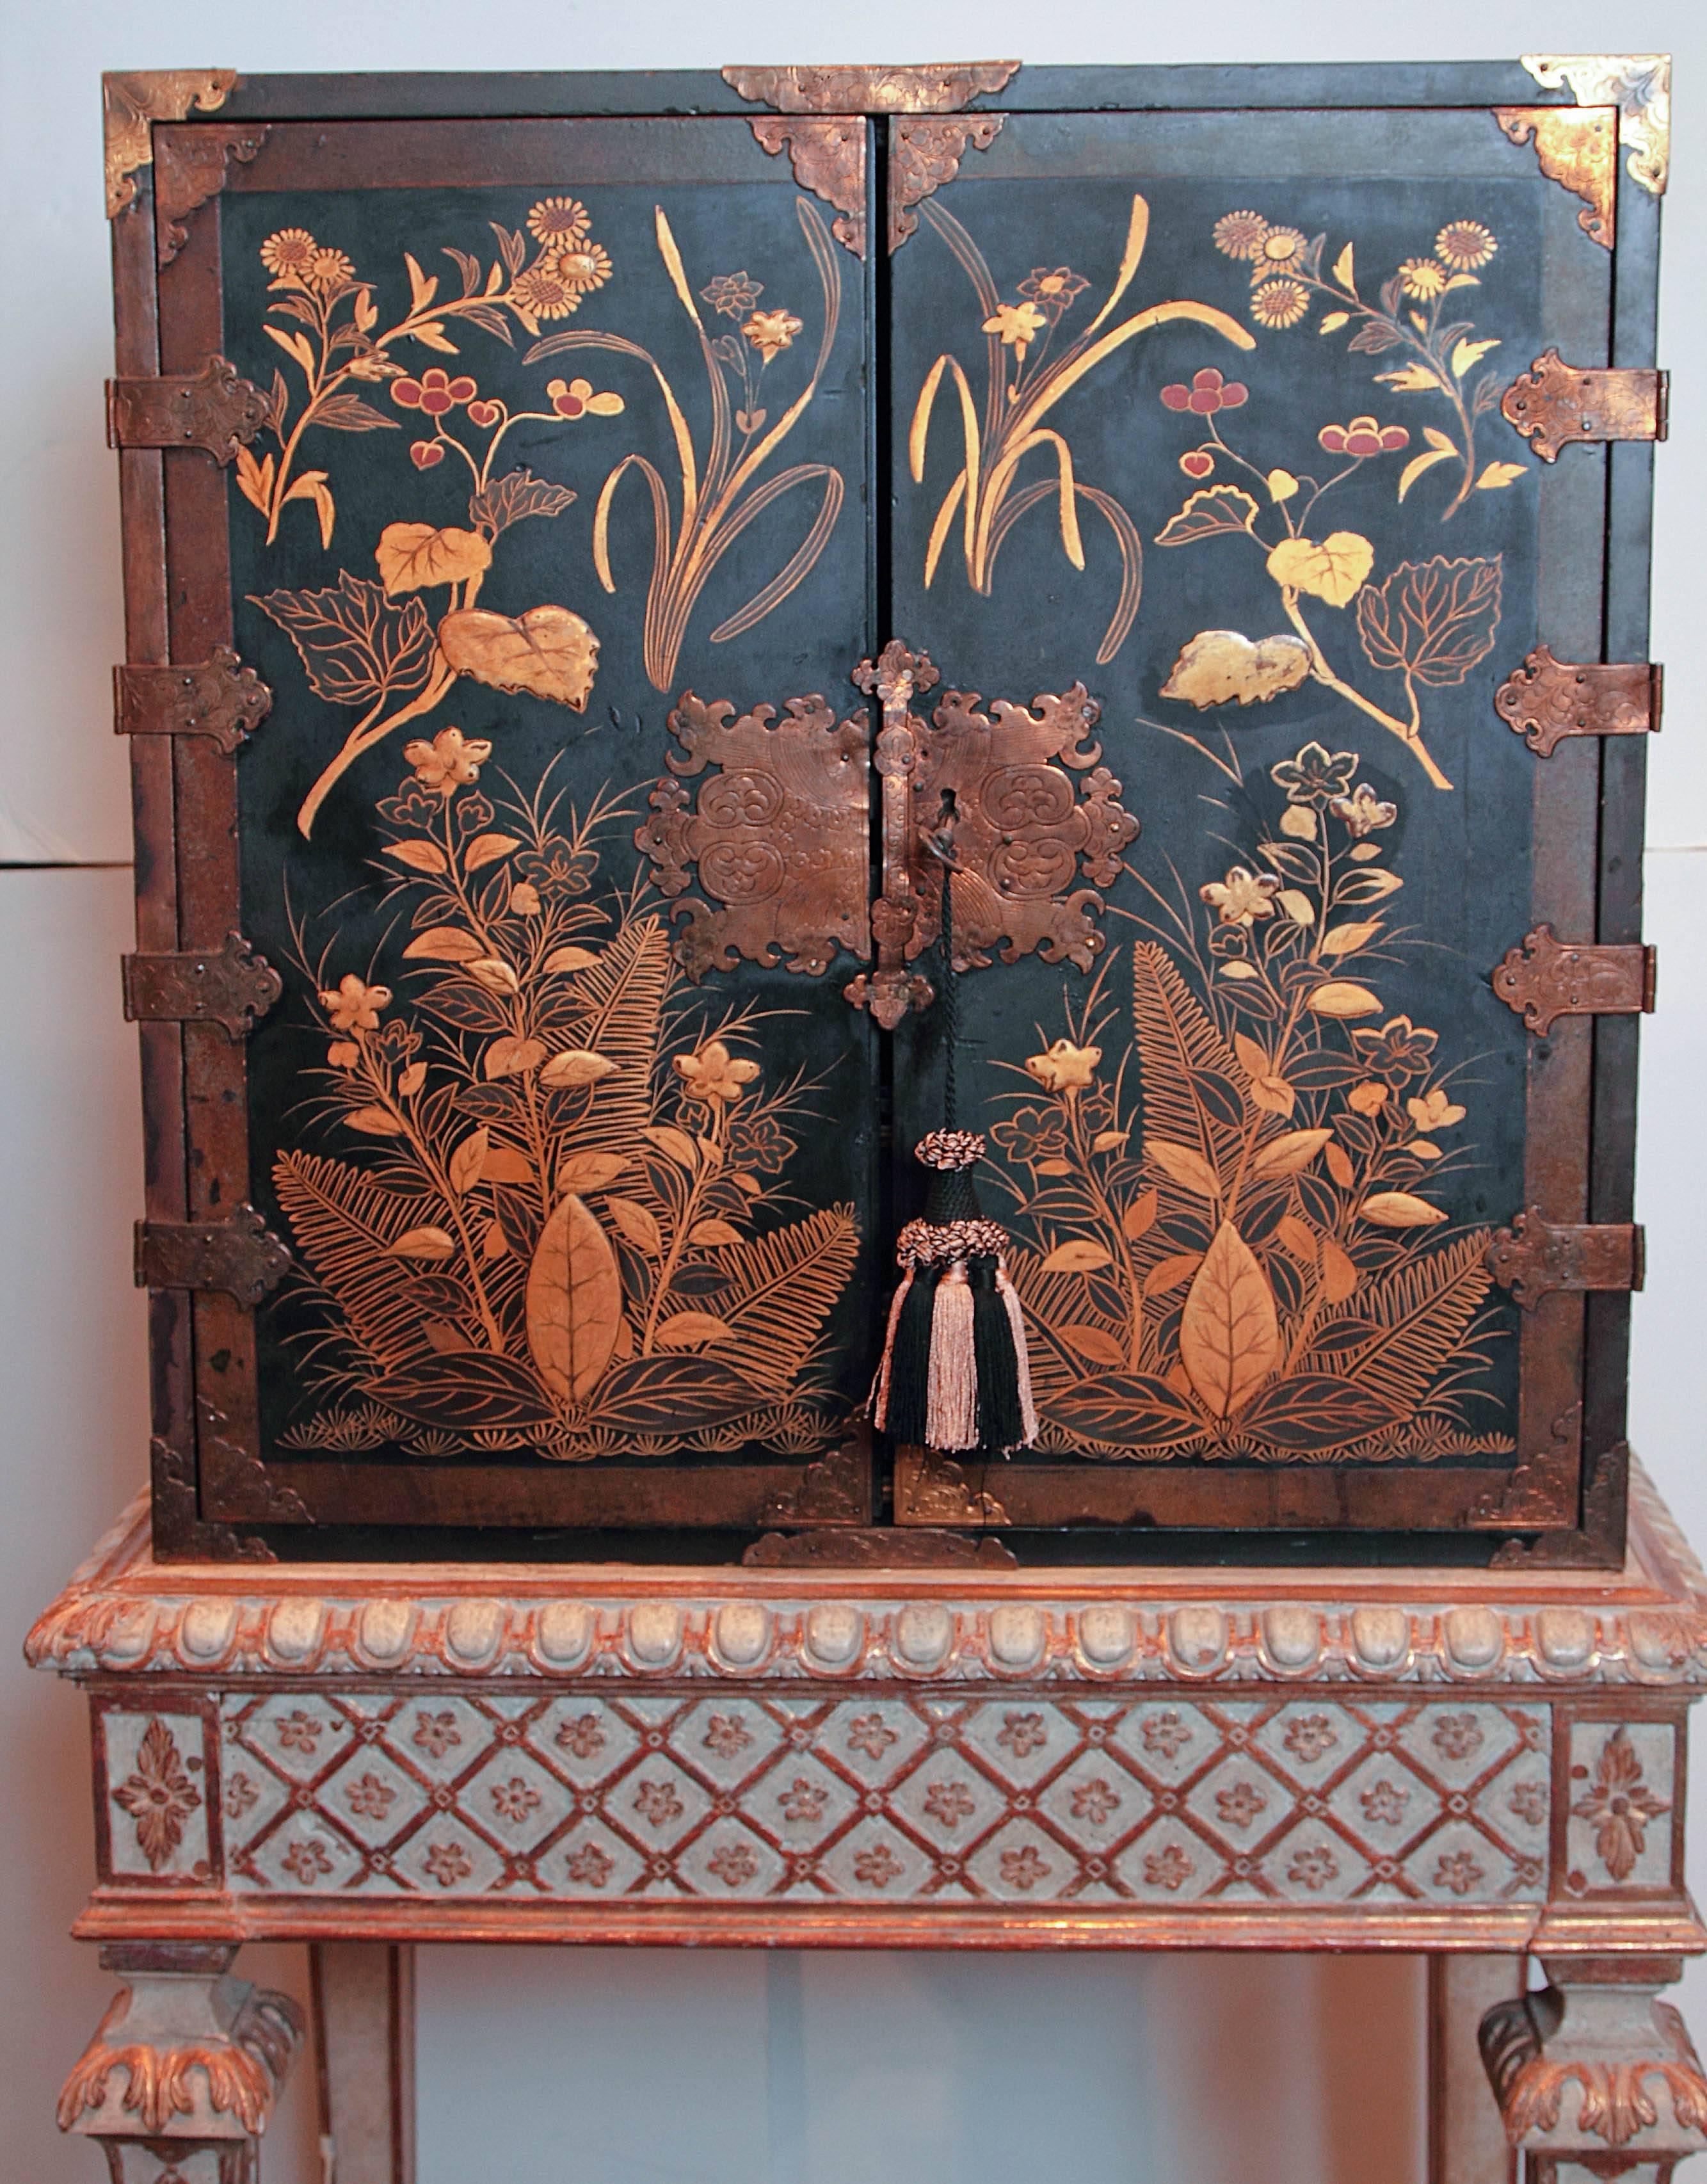 Anglo-Japanese 19th Century English Japanned Black Lacquered Cabinets on Stands